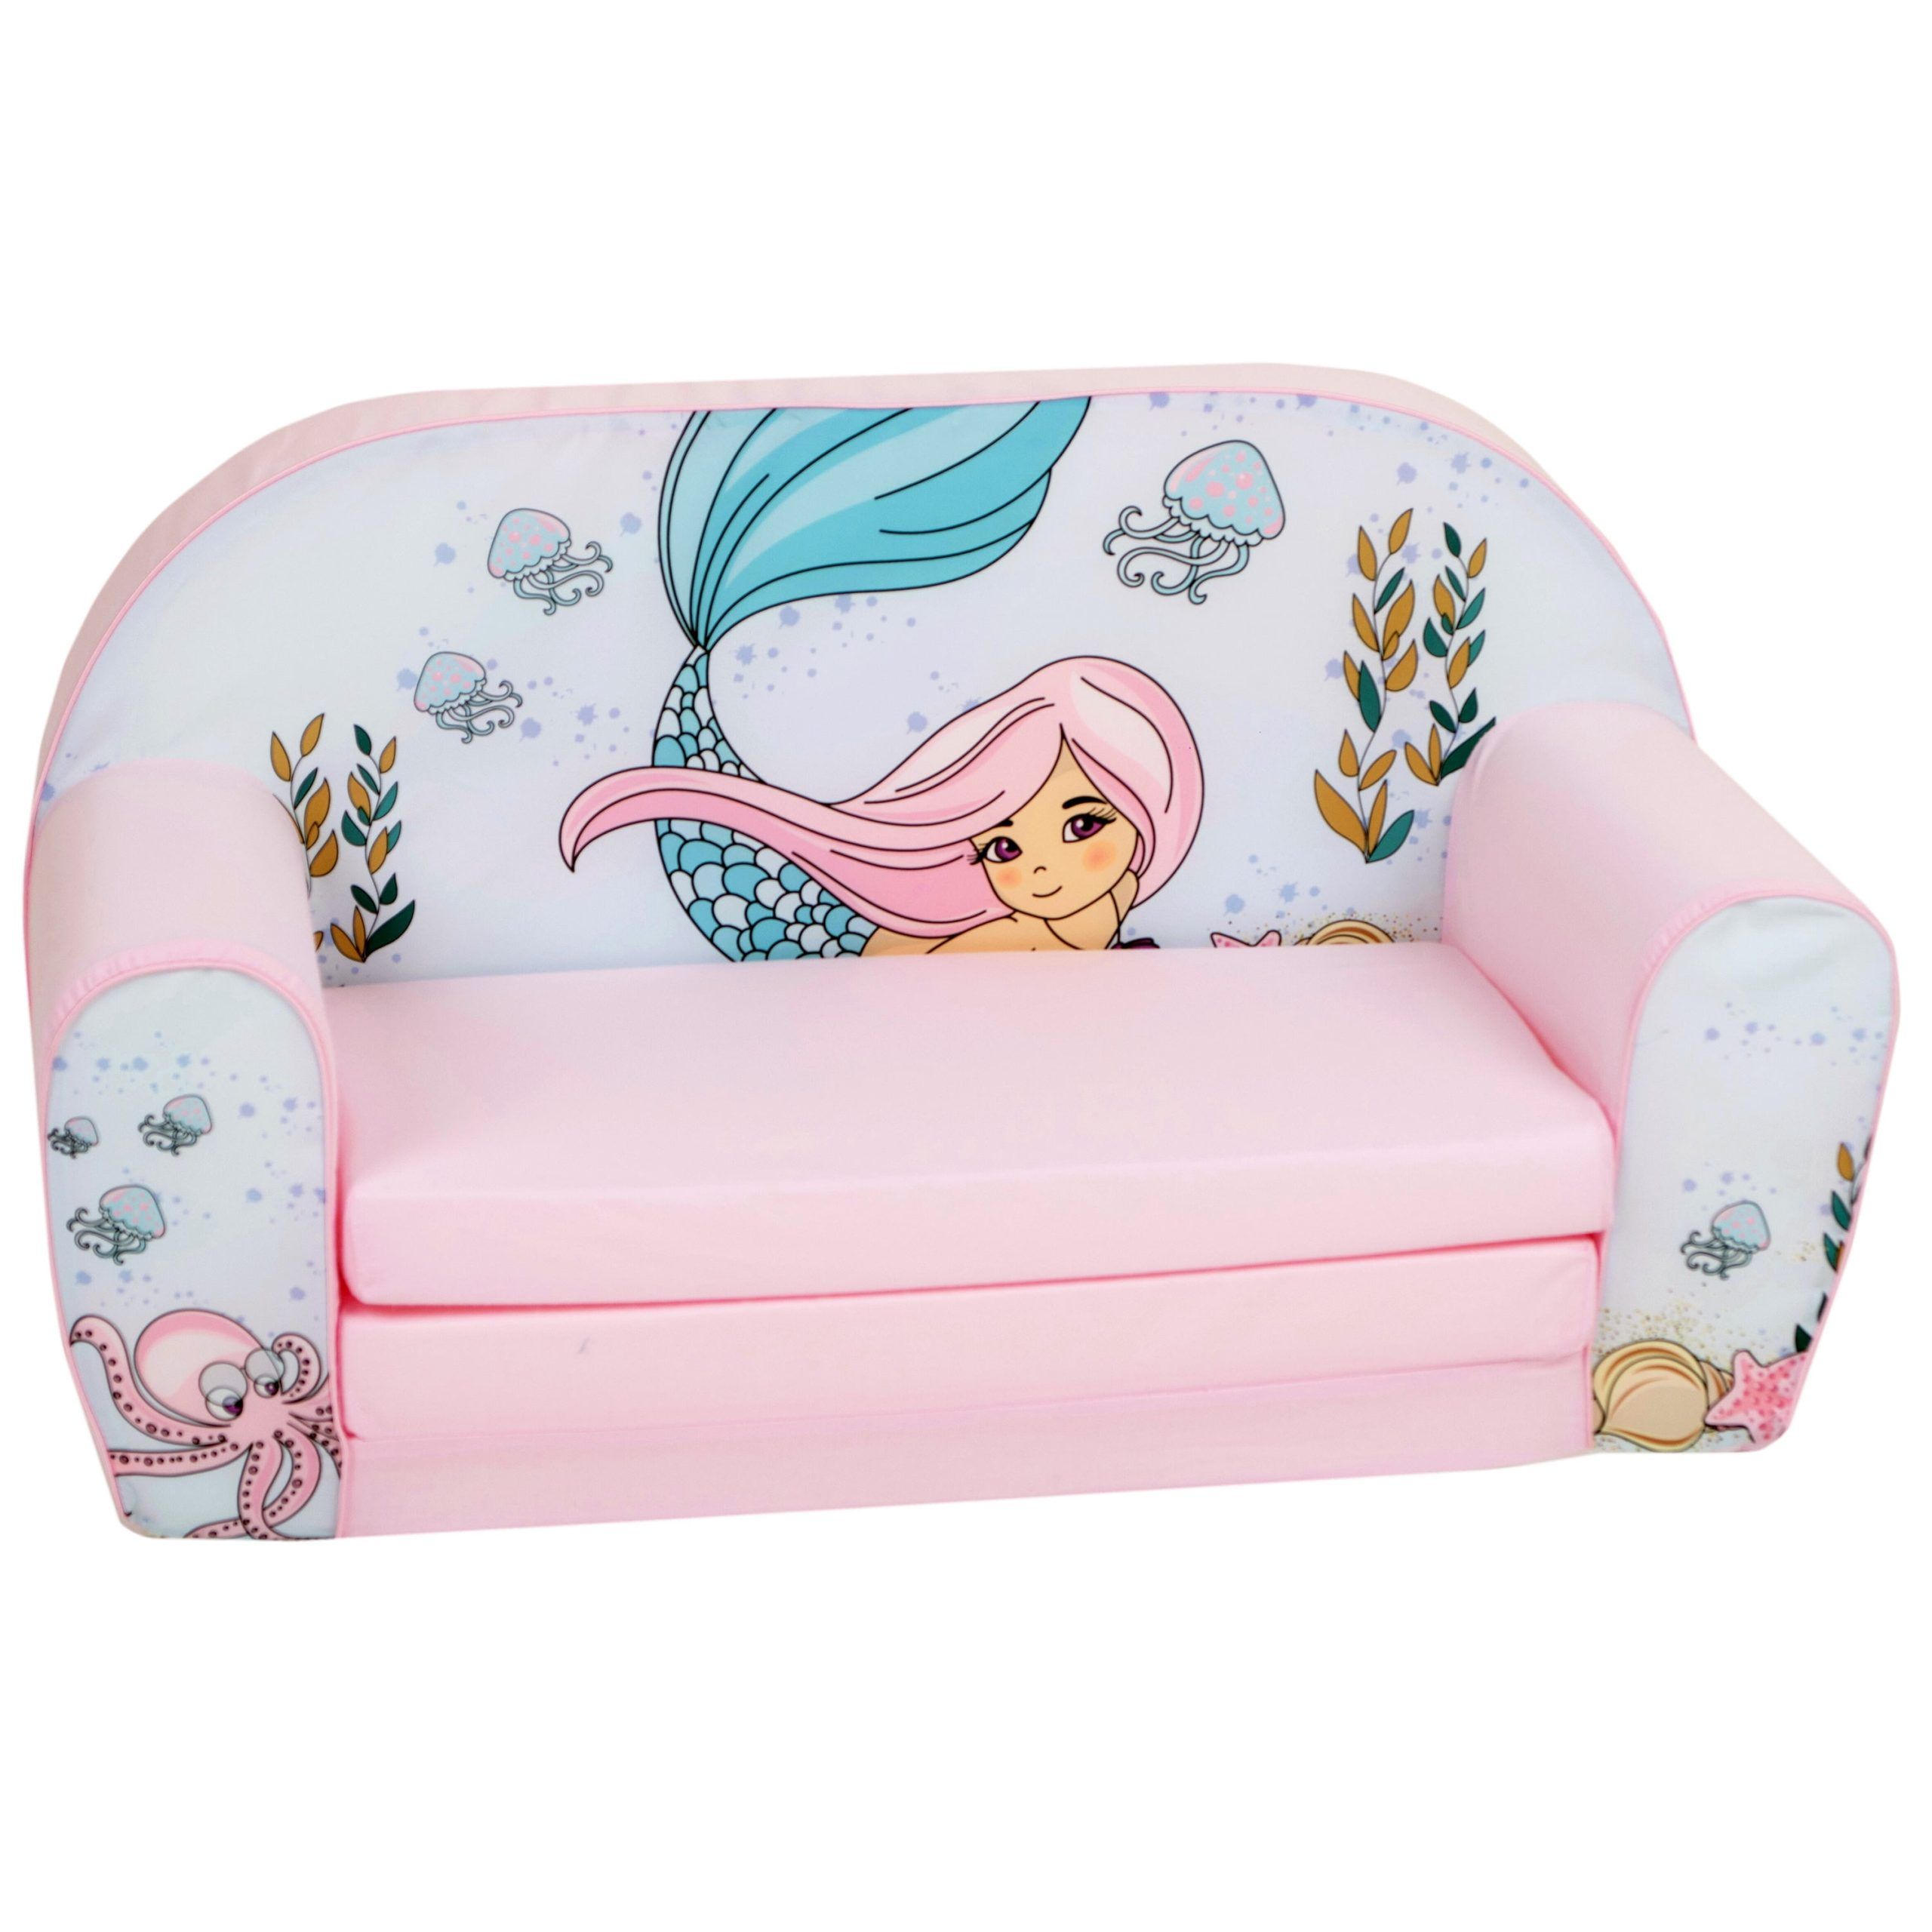 Delsit Toddler Couch & Kids Sofa – European Made Children's 2 In 1 Flip Intended For Children&#039;s Sofa Beds (View 12 of 20)